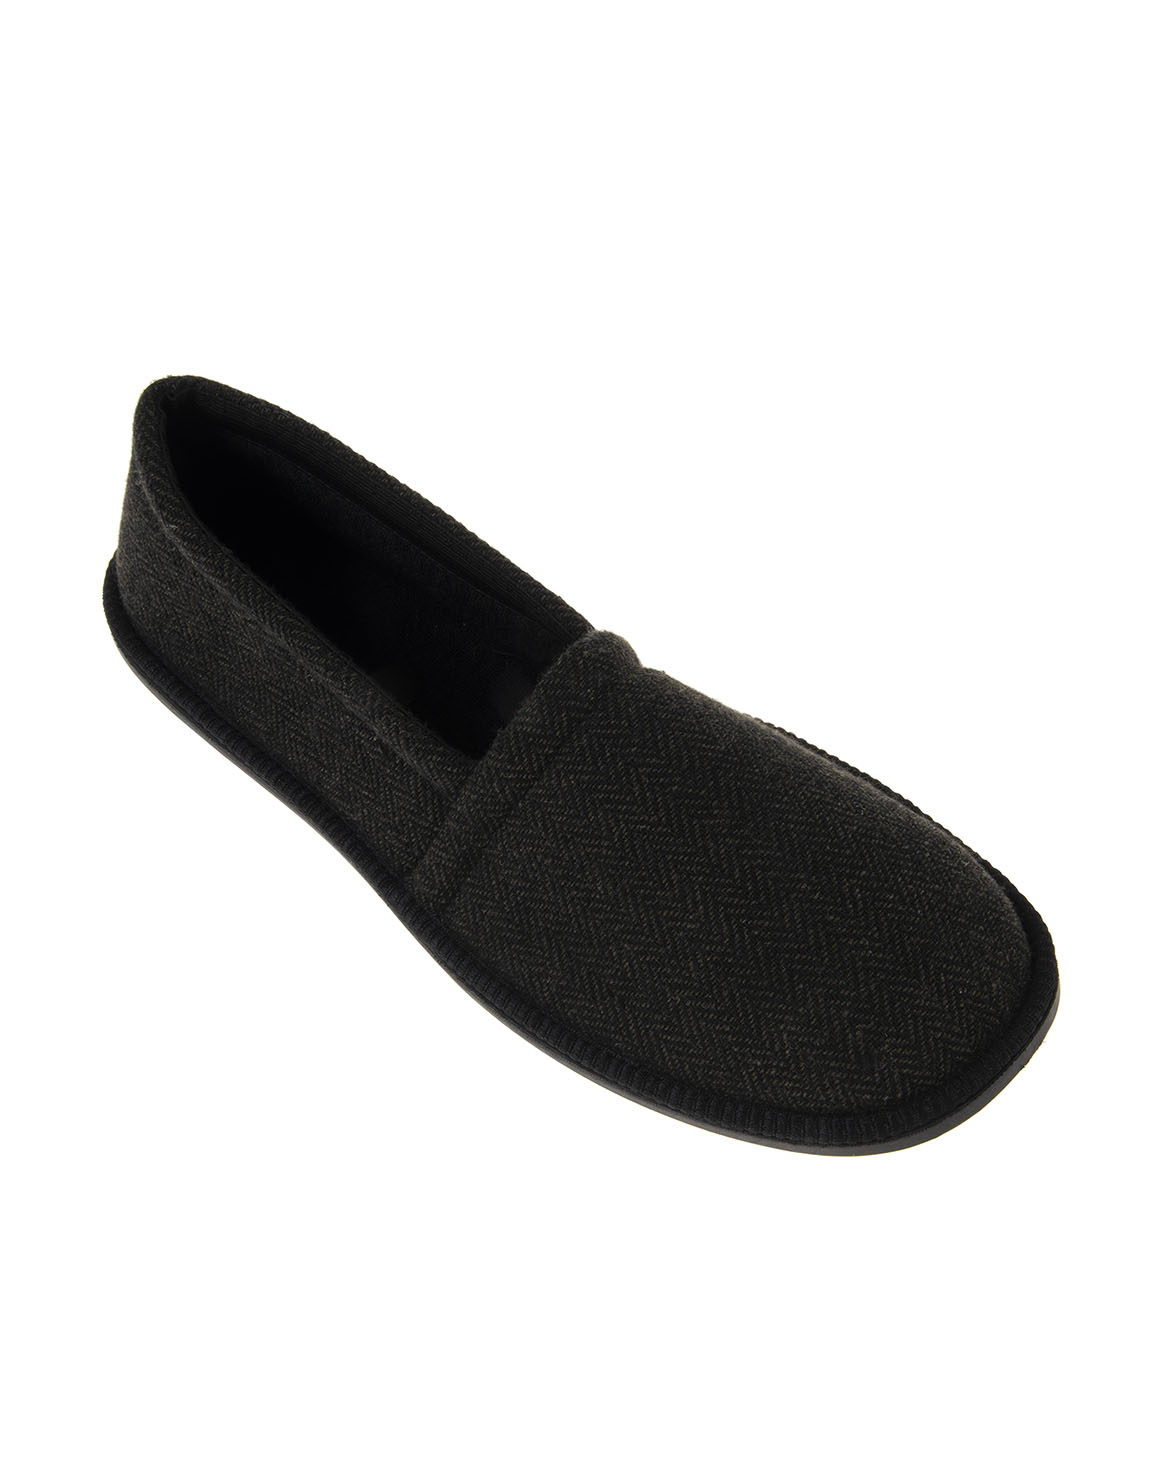 woolworths men's morning slippers